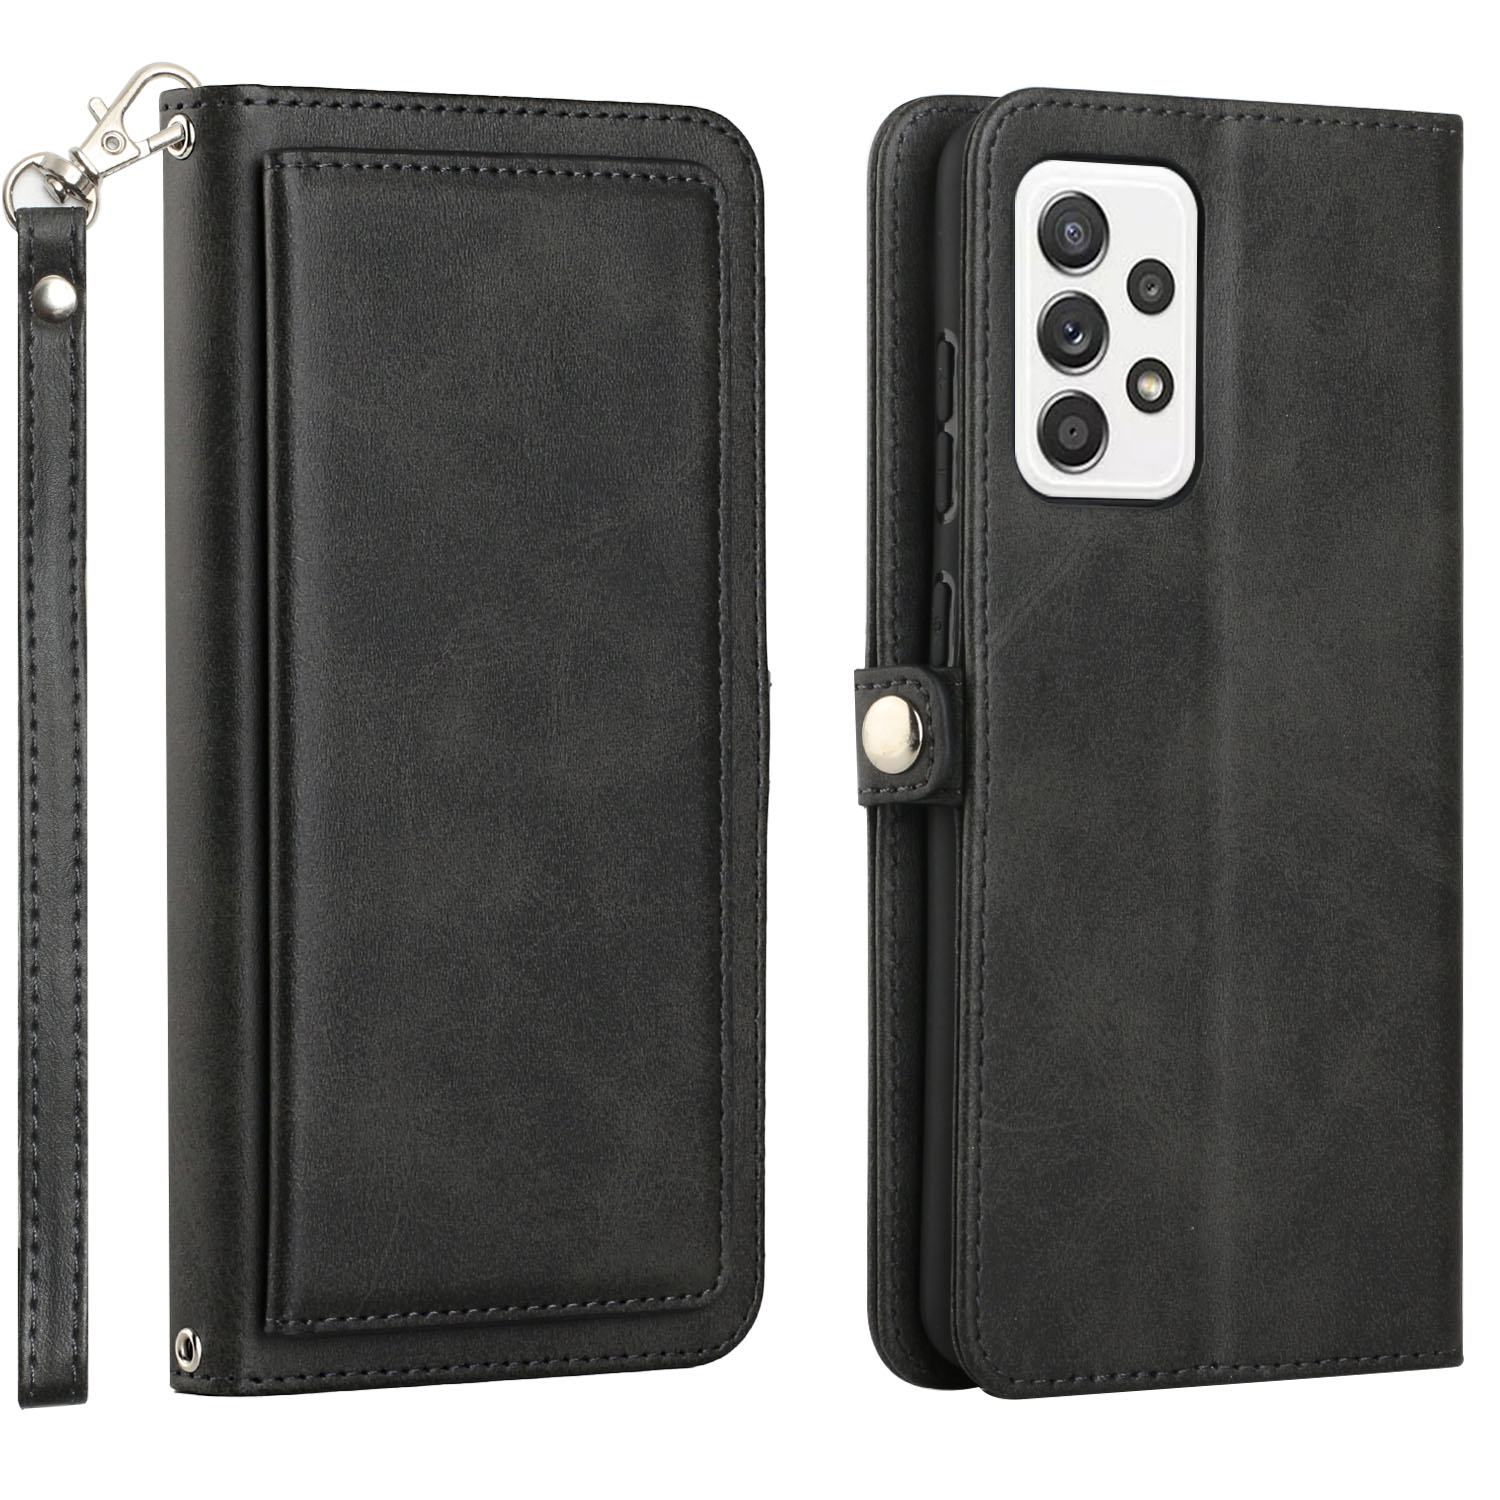 Premium PU Leather Folio WALLET Front Cover Case for Galaxy A52 5G (Black)